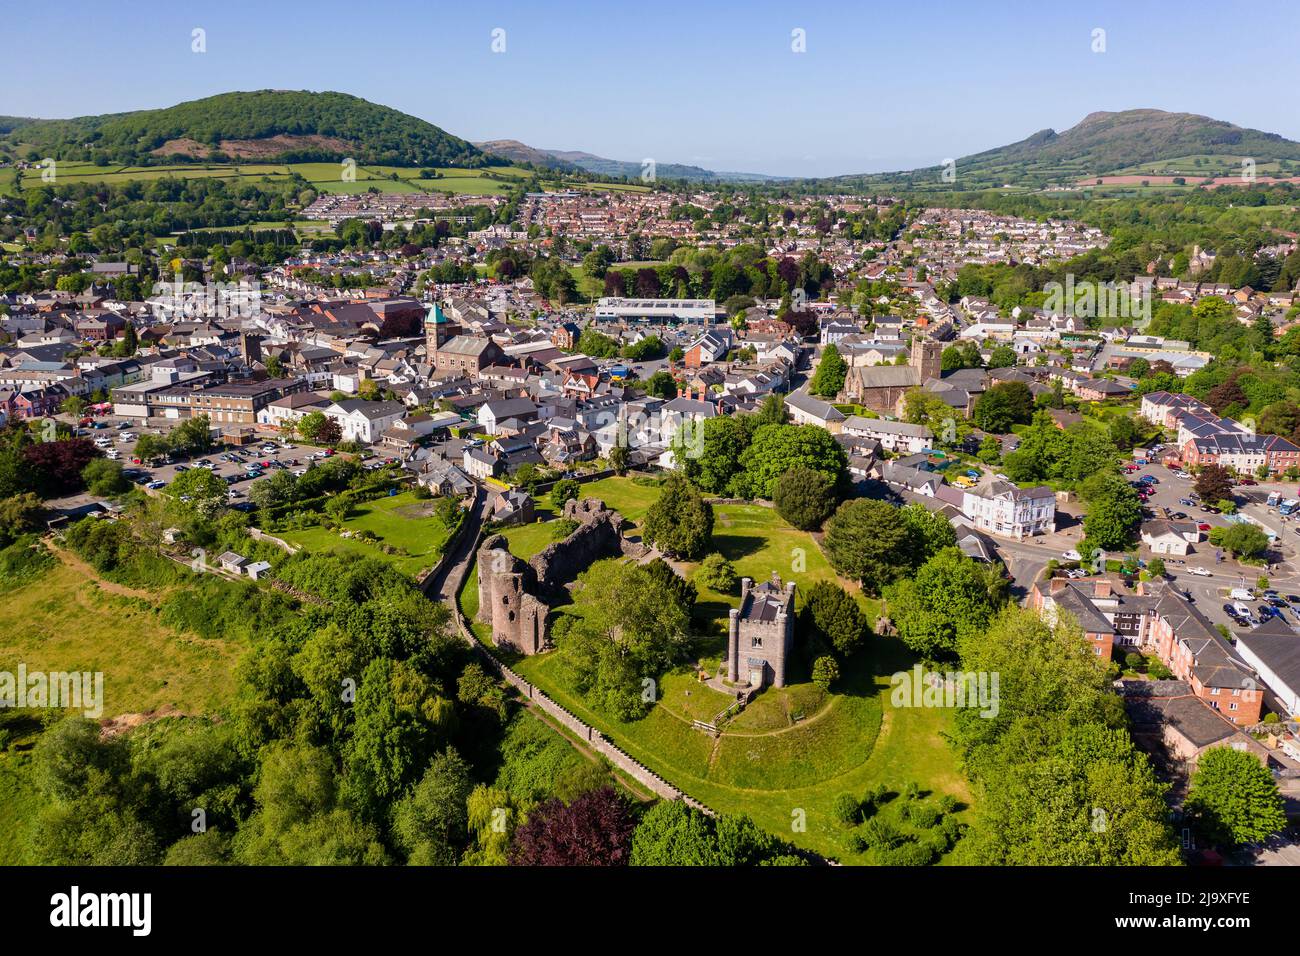 ABERGAVENNY, WALES - MAY 14 2022: Aerial view of the Welsh market town of Abergavenny, Monmouthshire surrounded by green fields and hills. Stock Photo